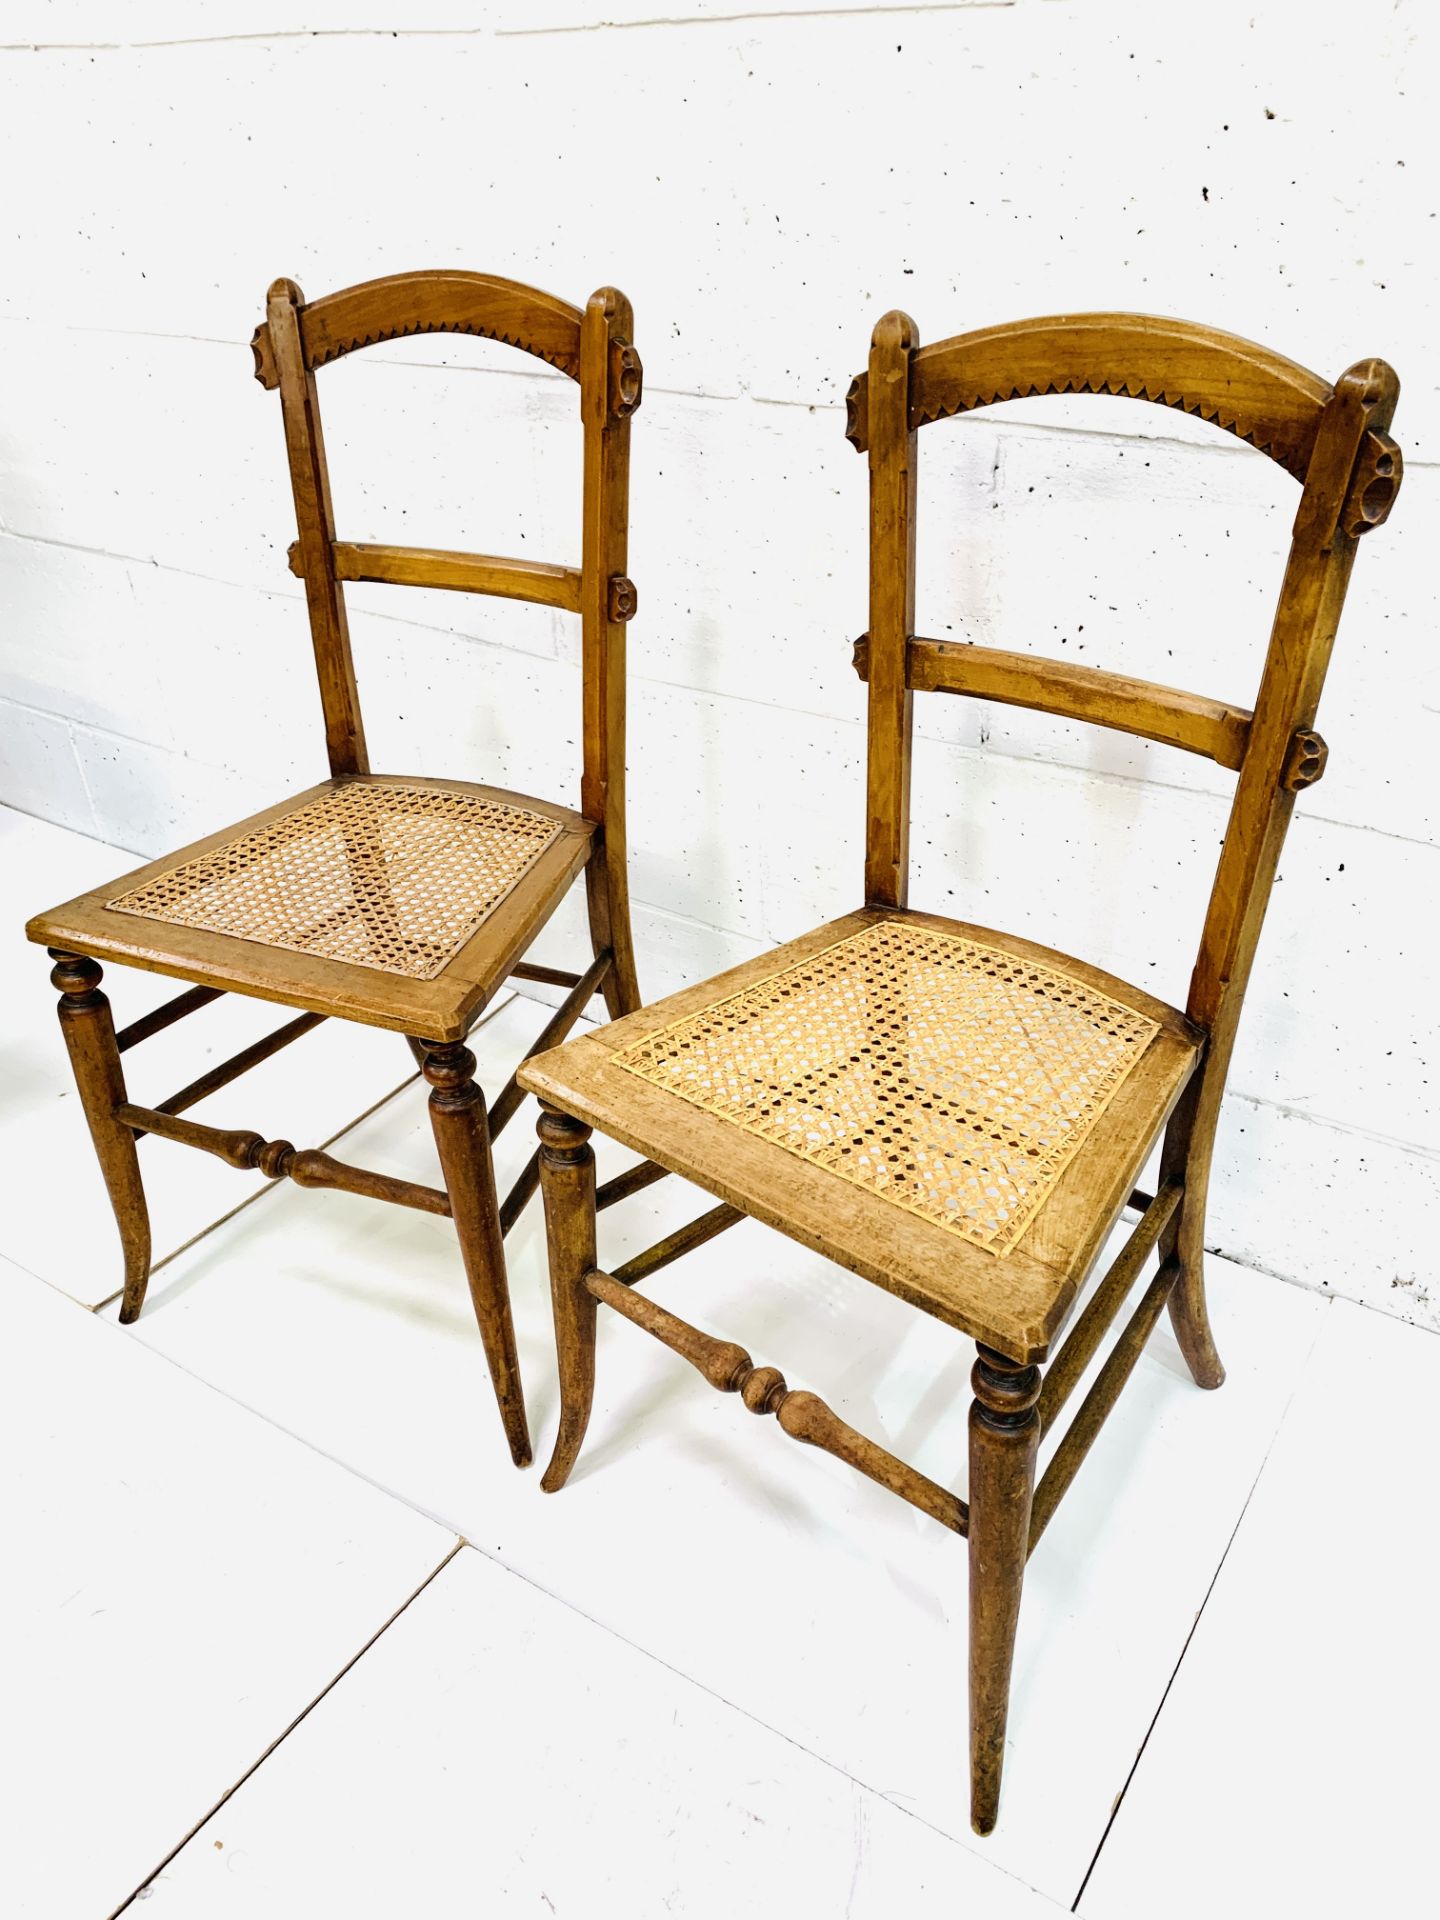 Pair of decorative cane seat arched back bedroom chairs - Image 2 of 5